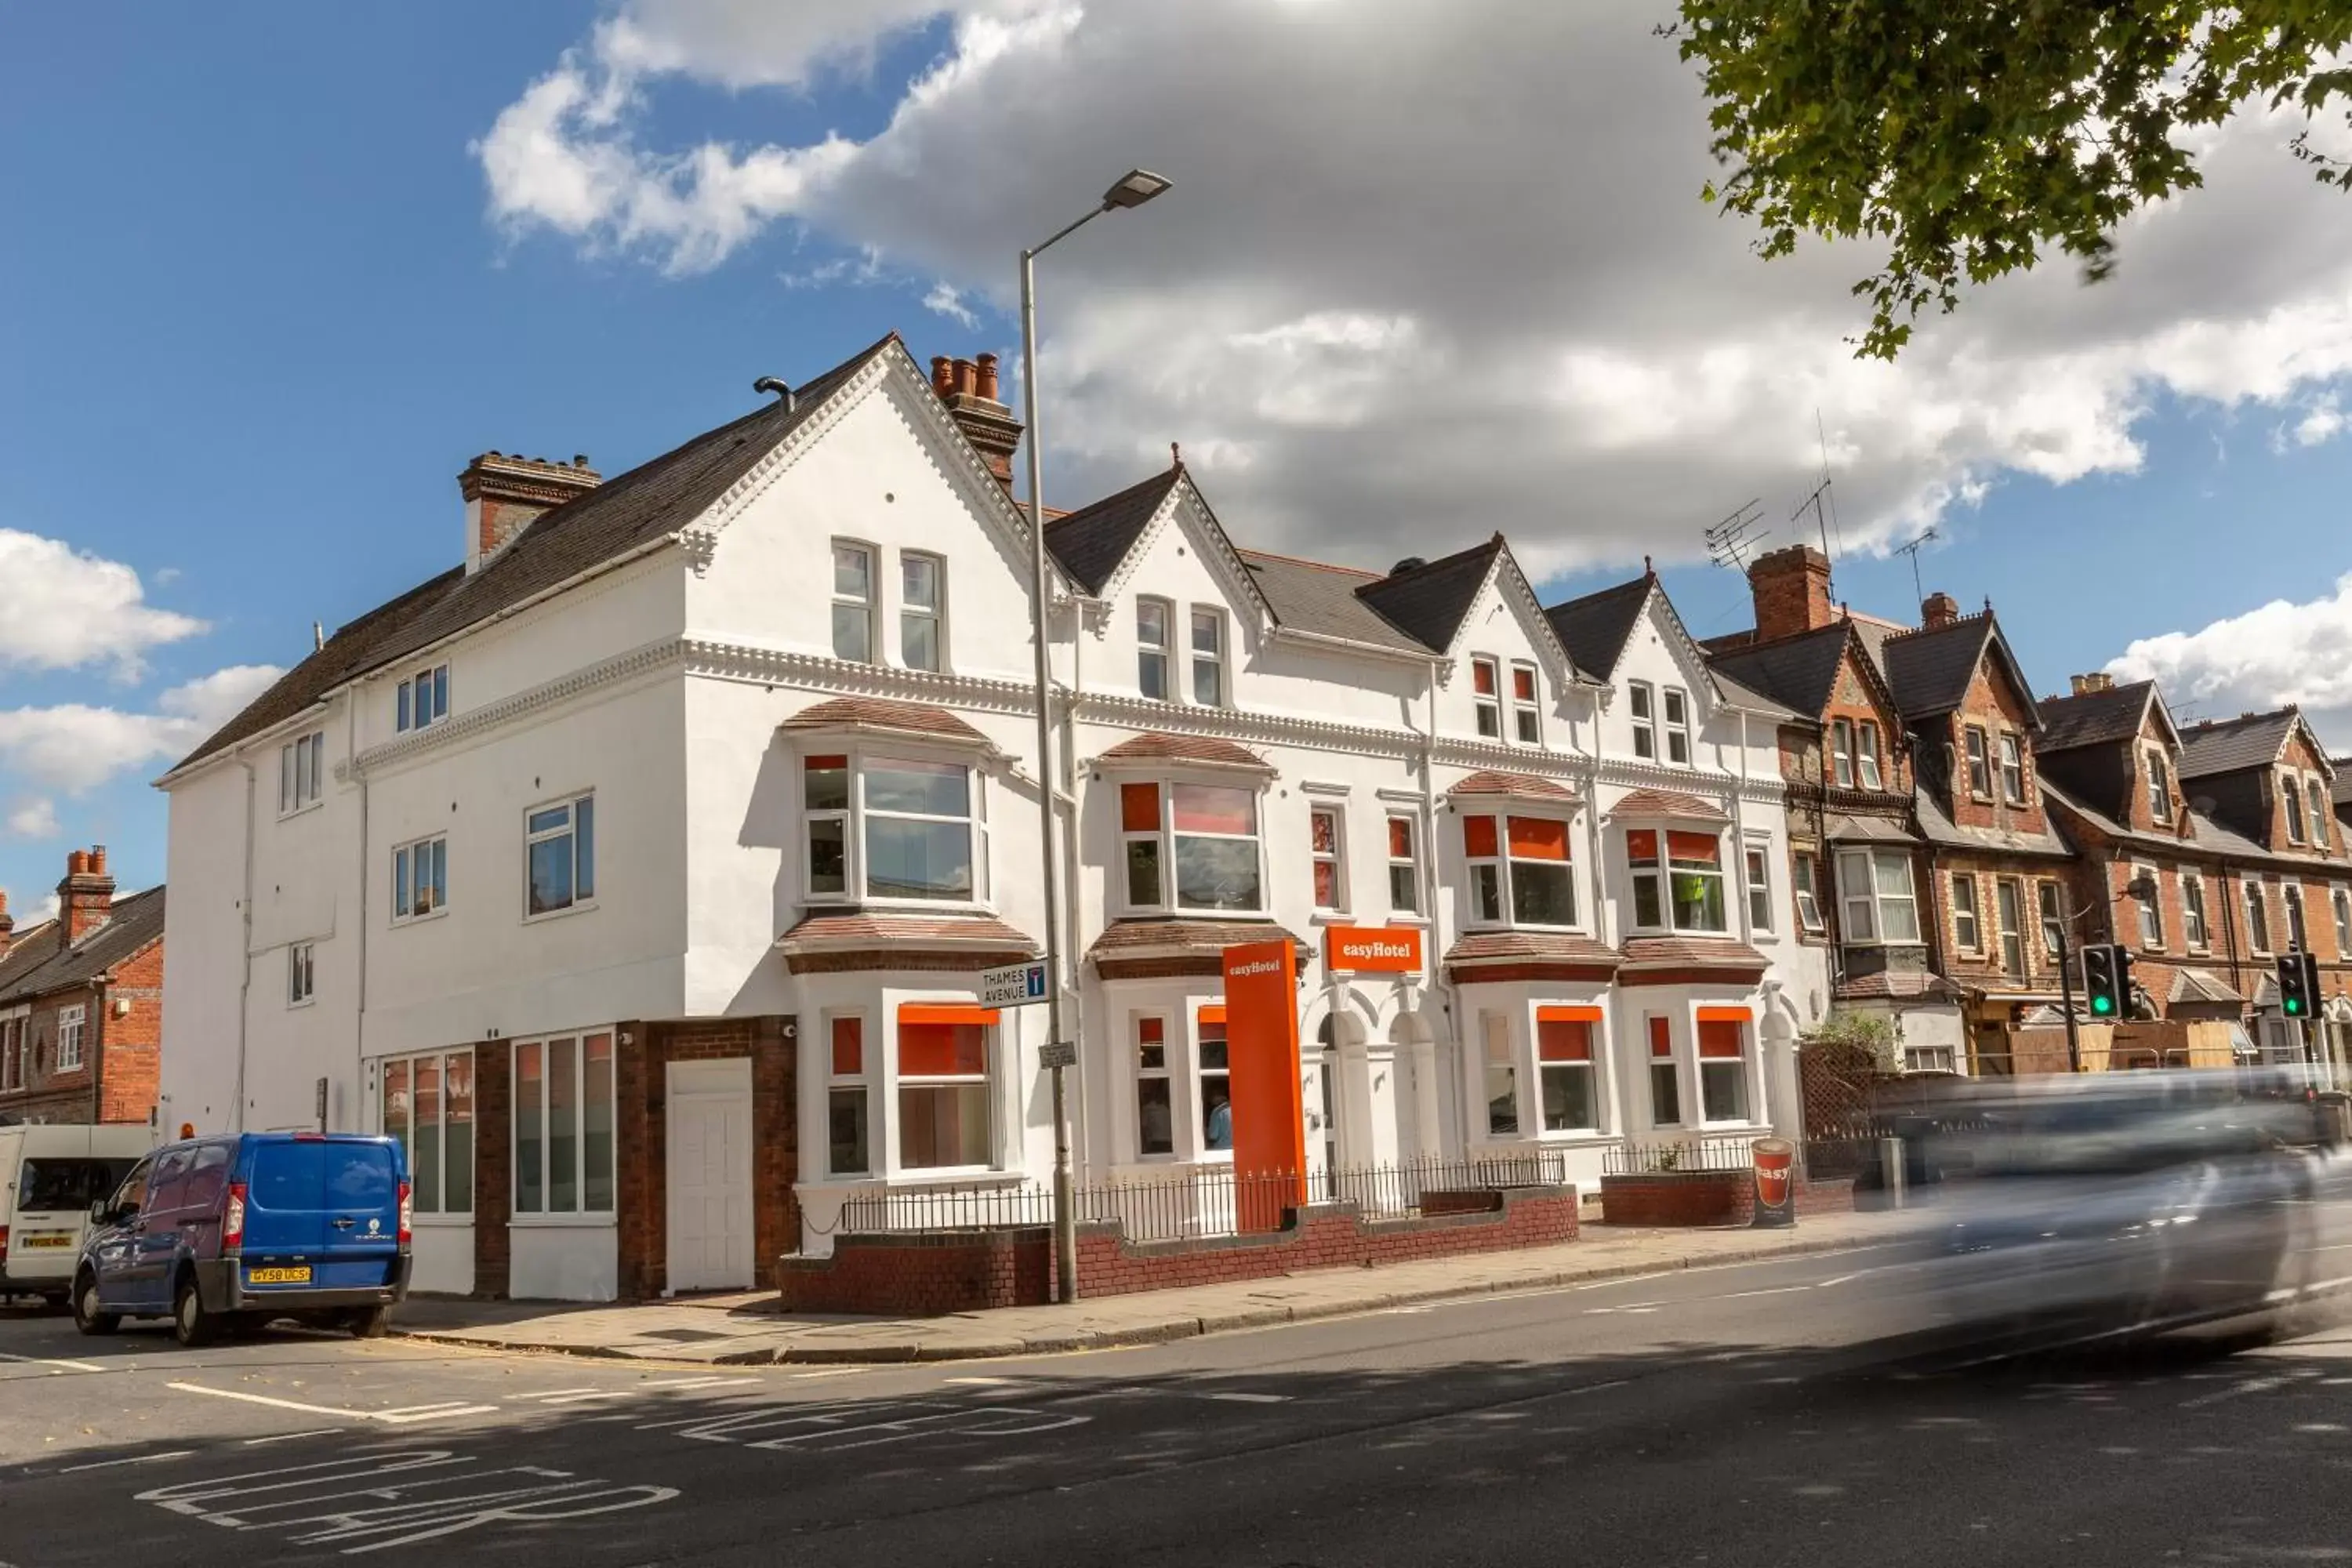 Property Building in Easyhotel Reading